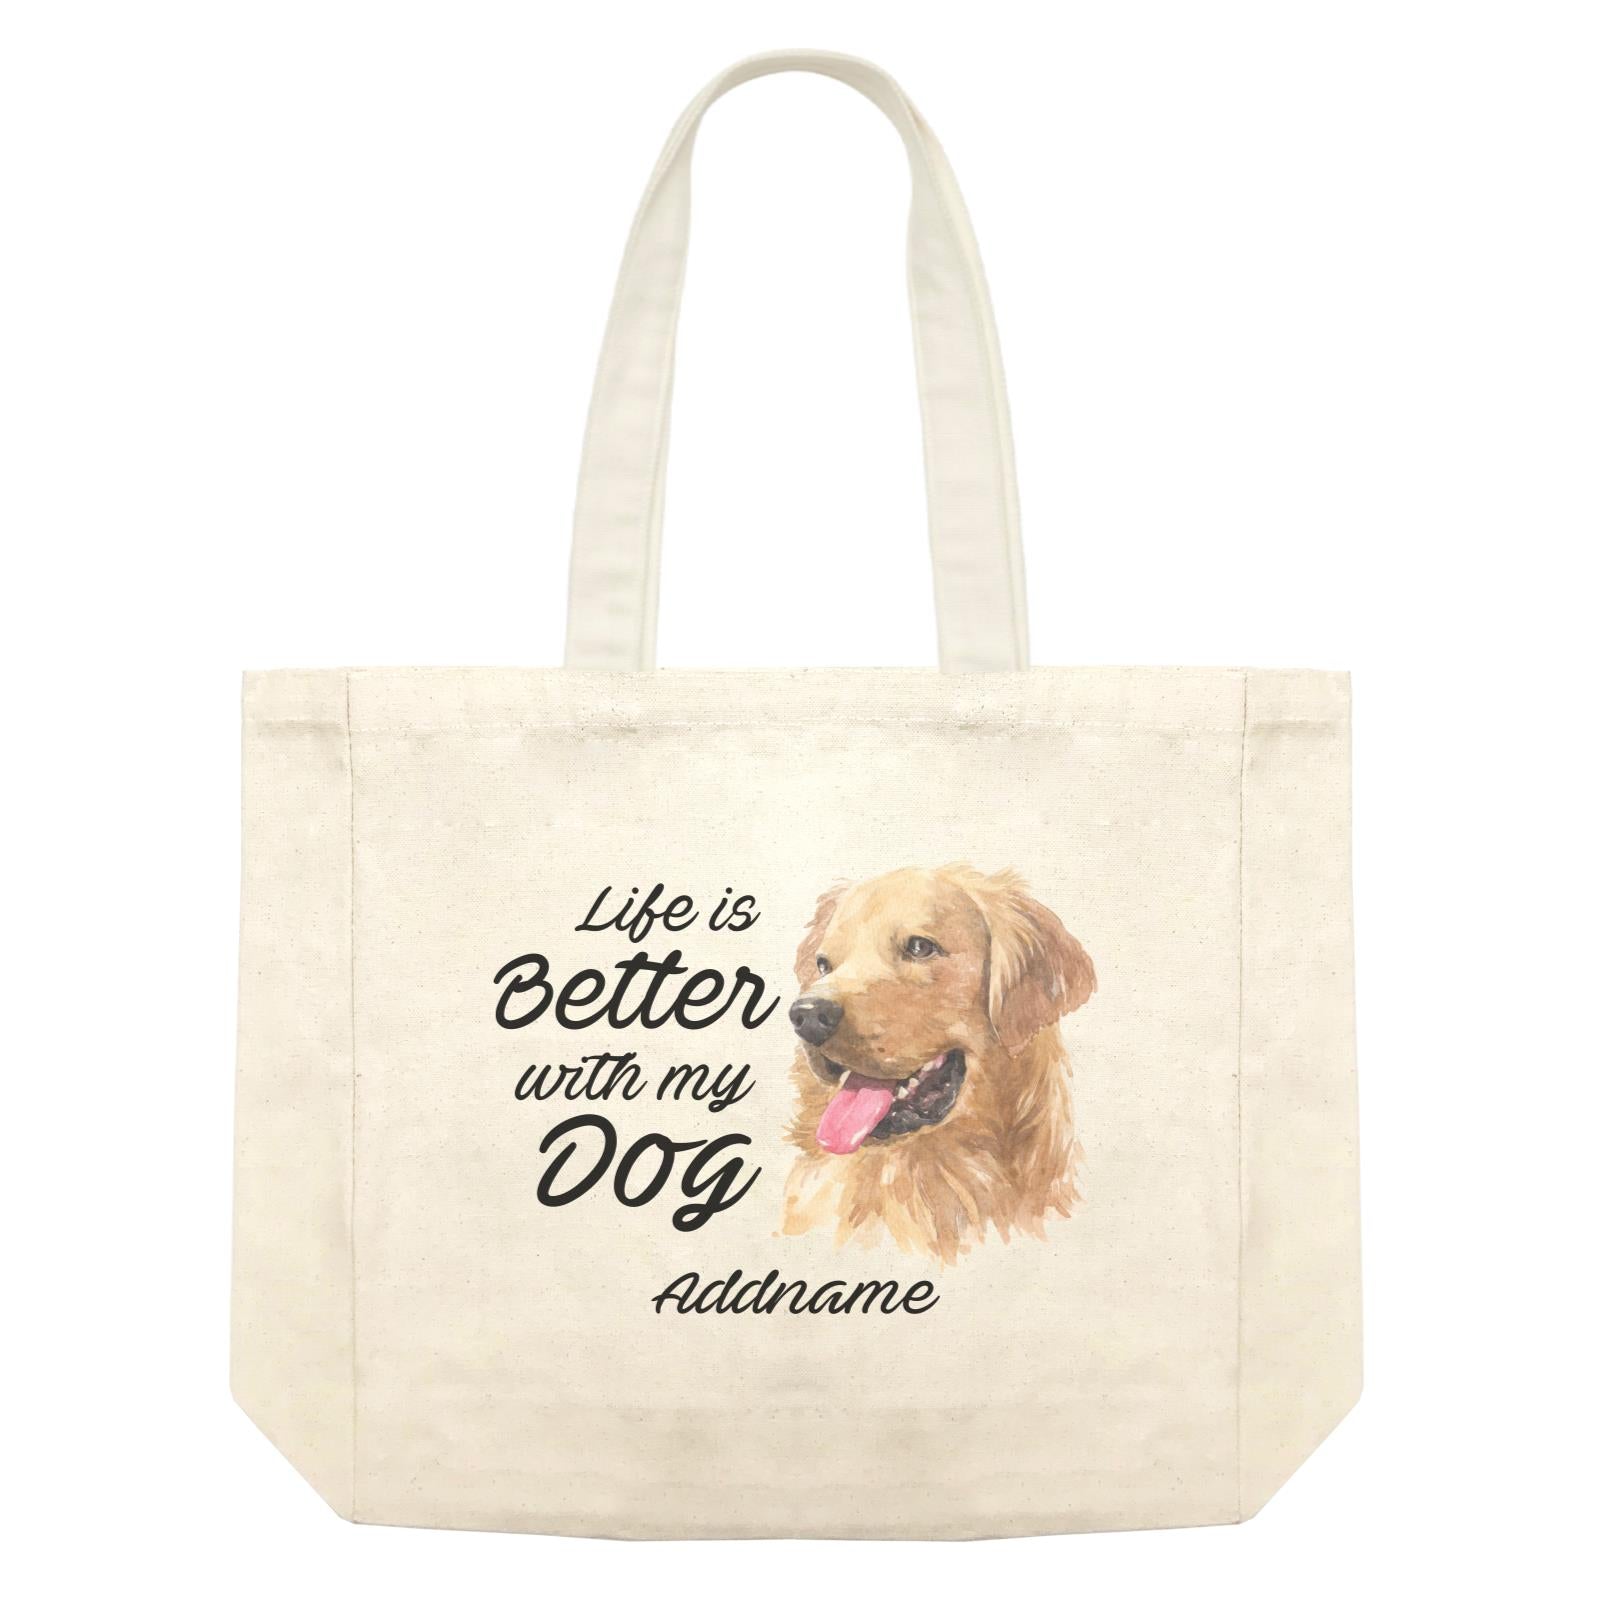 Watercolor Life is Better With My Dog Golden Retriever Left Addname Shopping Bag